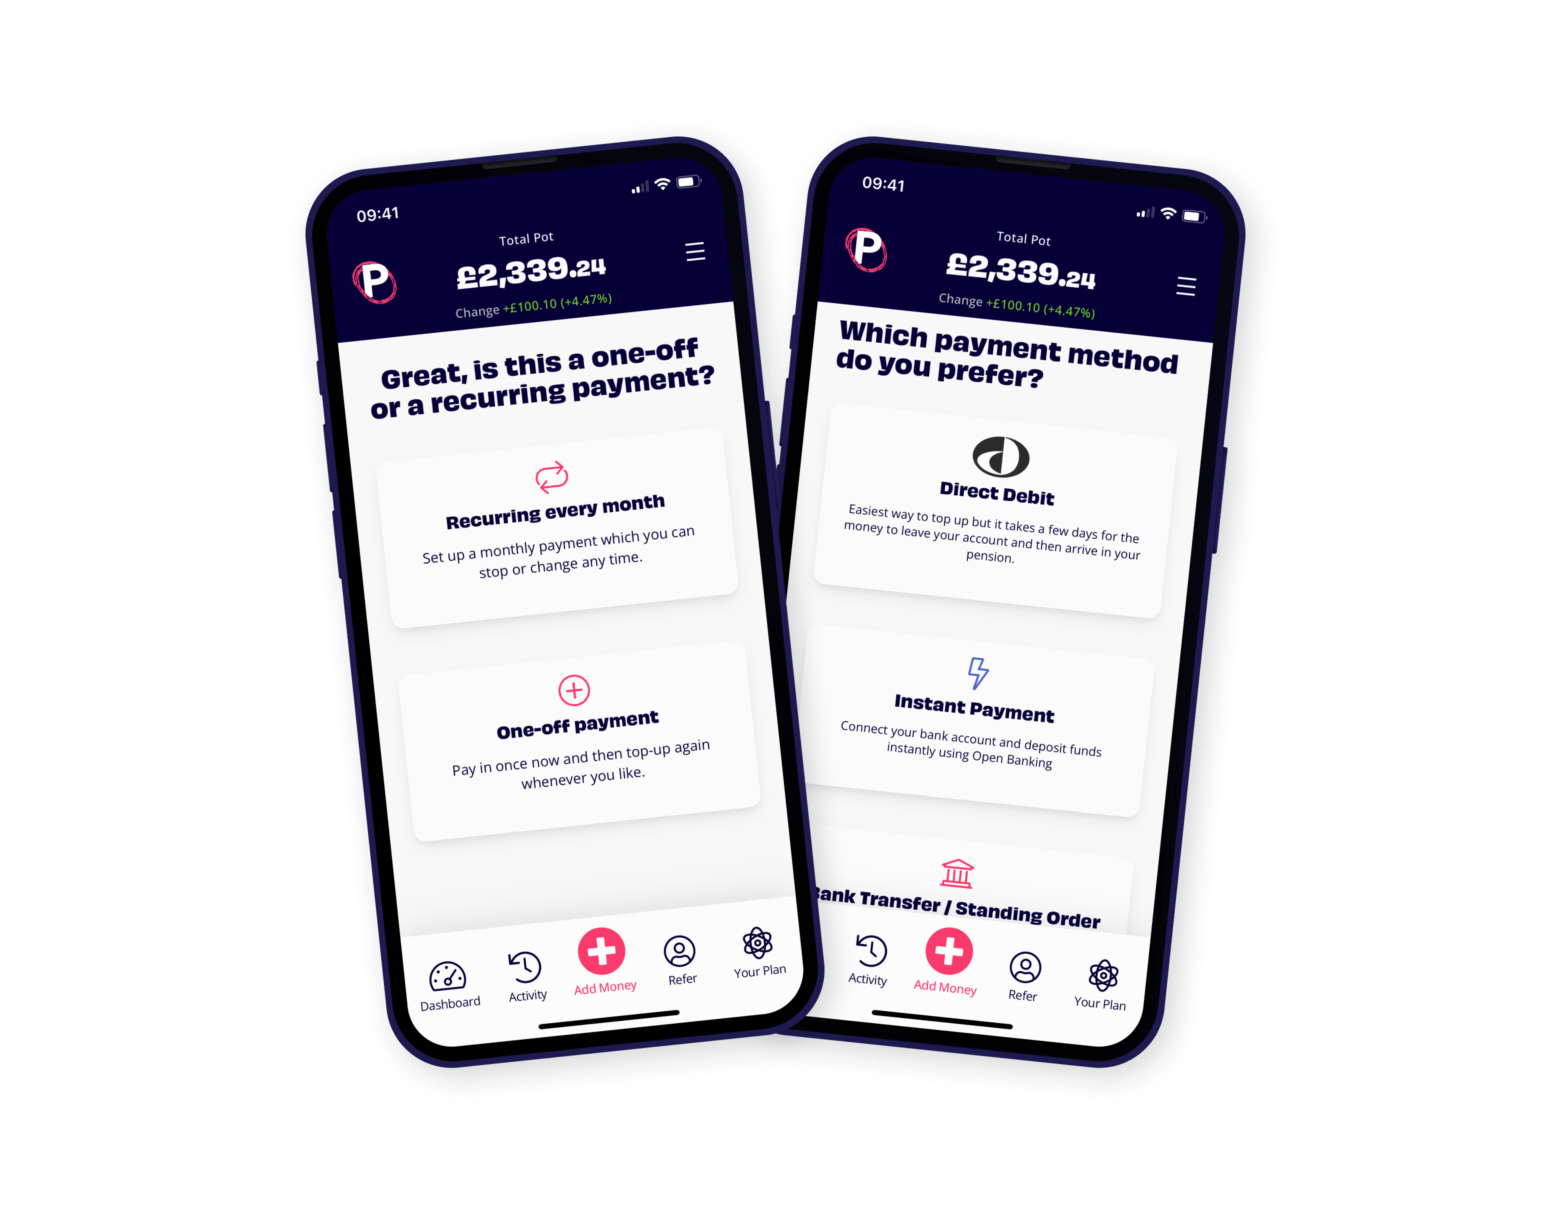 Pension contribution type and payment type screens in the Penfold app